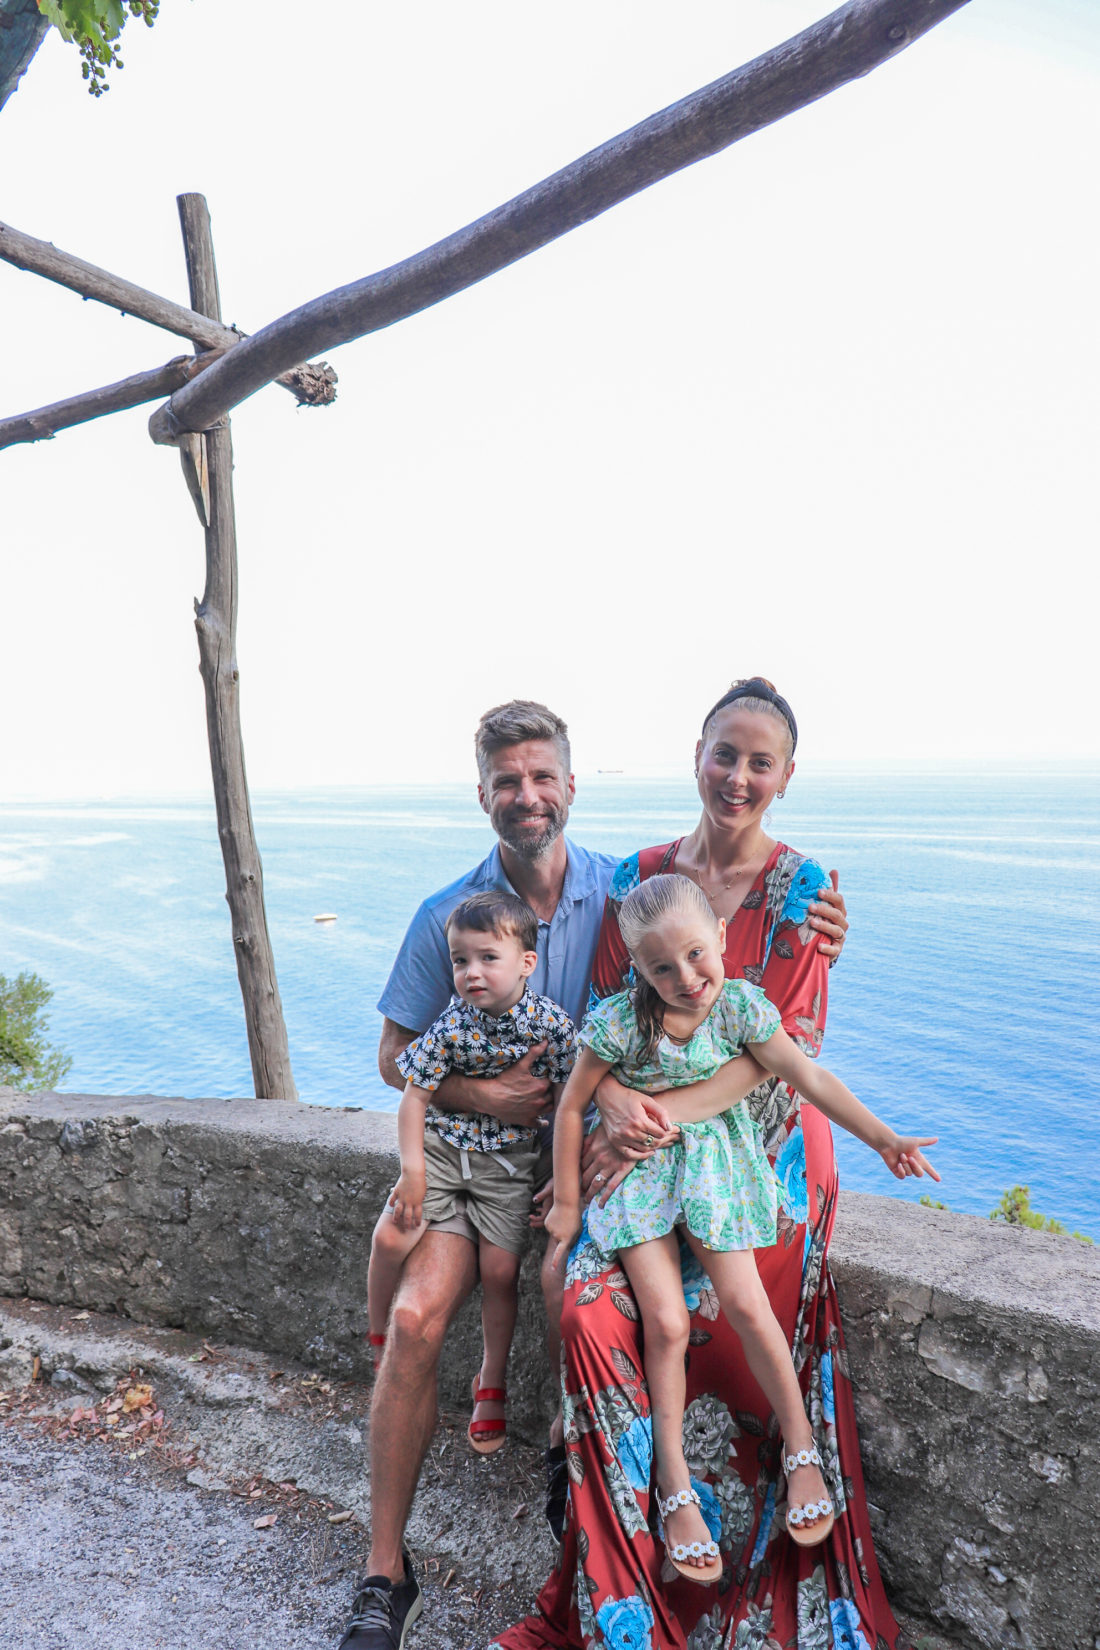 Eva Amurri Martino and husband Kyle with their children Marlowe and Major in Italy